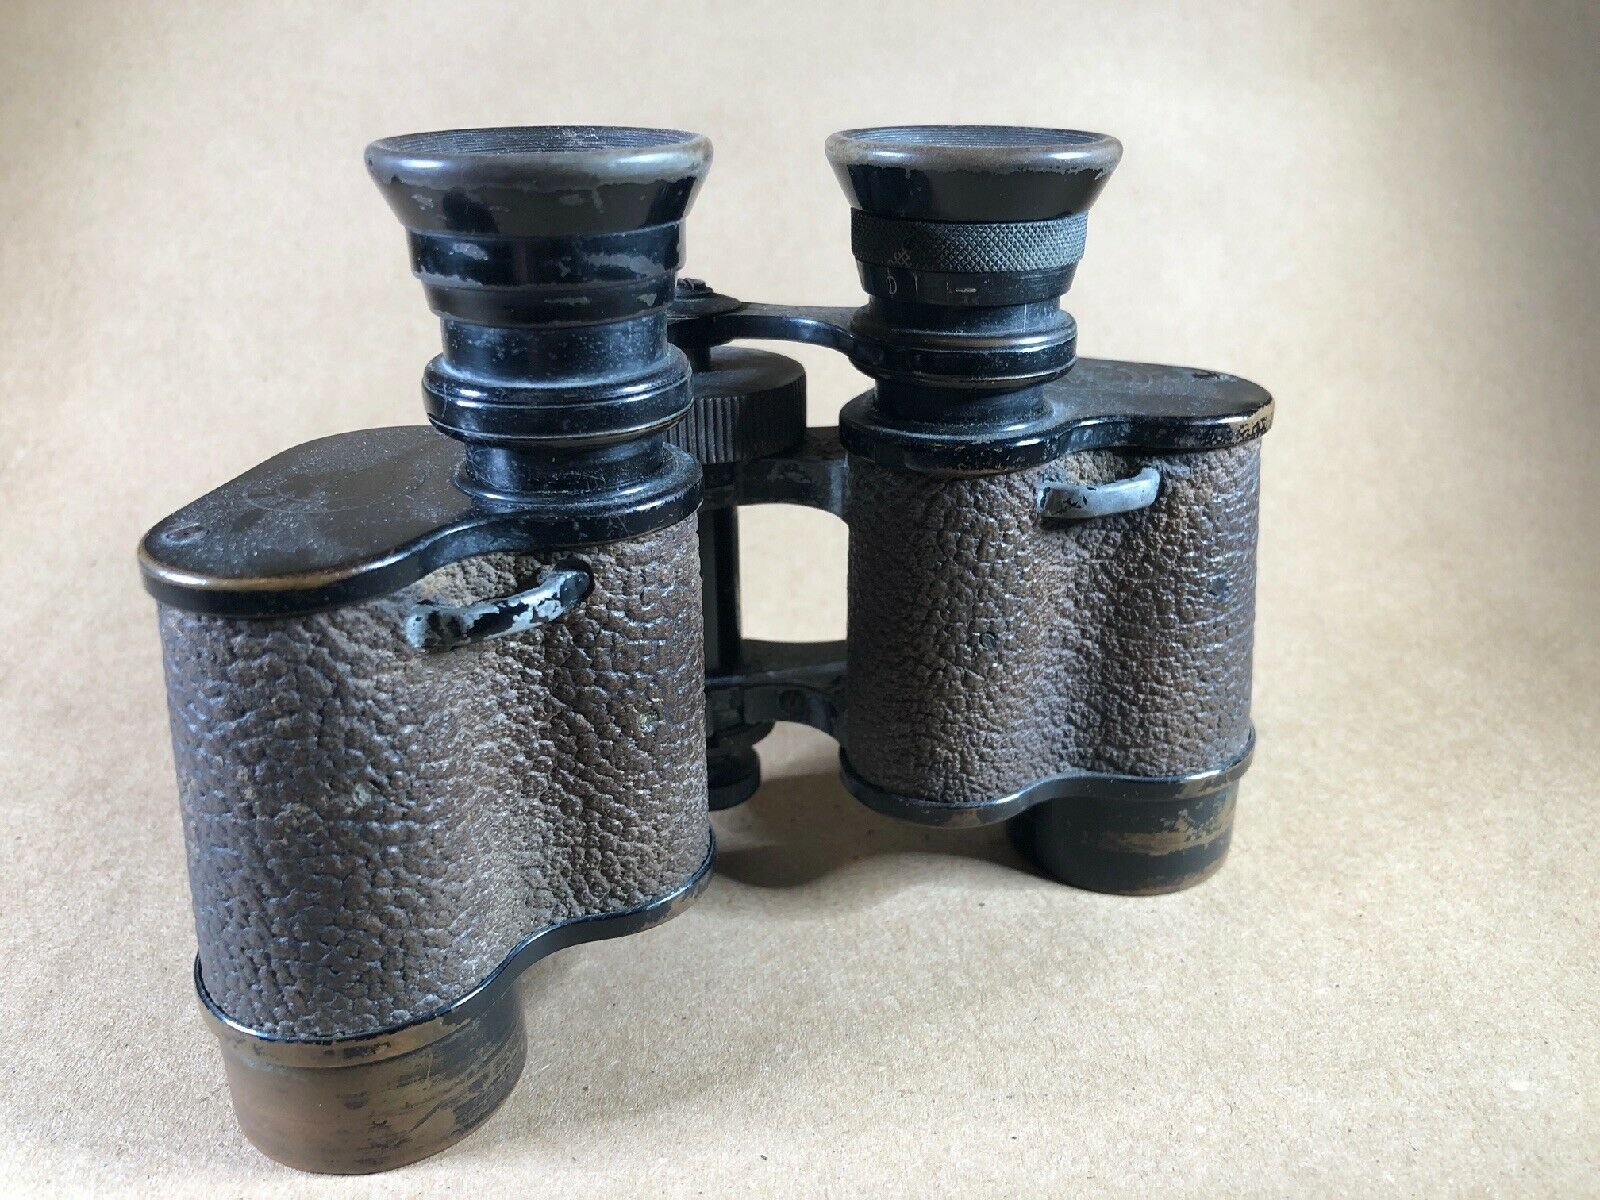 Binoculars, Bausch and Lomb Circa 1916-1932 Zeiss Prism Stereo - Annapolis Maritime Antiques